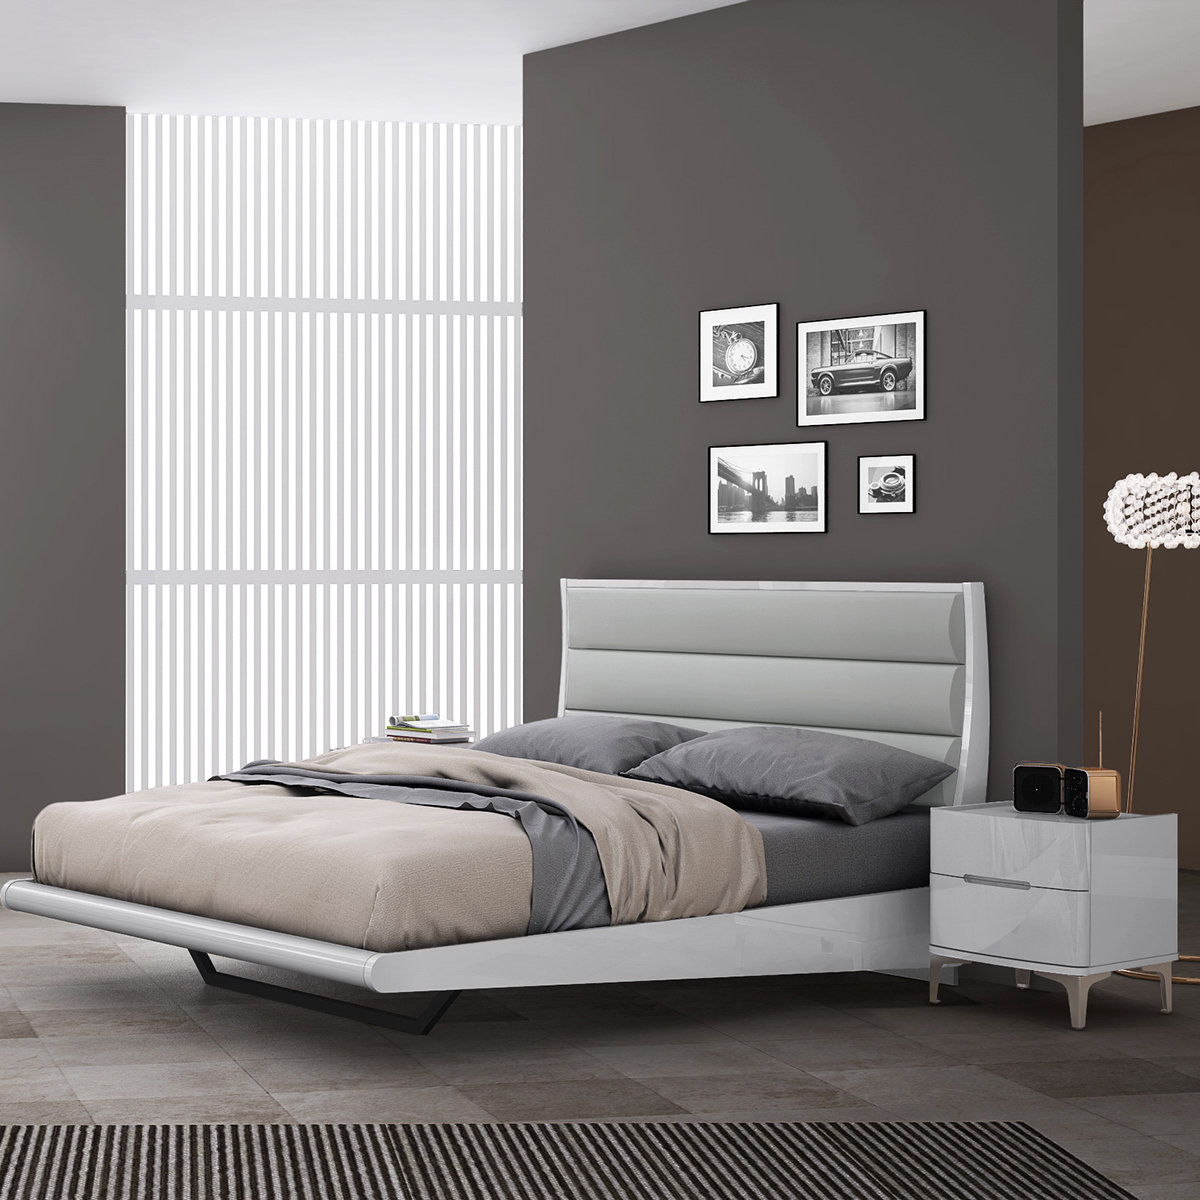 Alvy Cool Grey Floating 4ft6 Bed